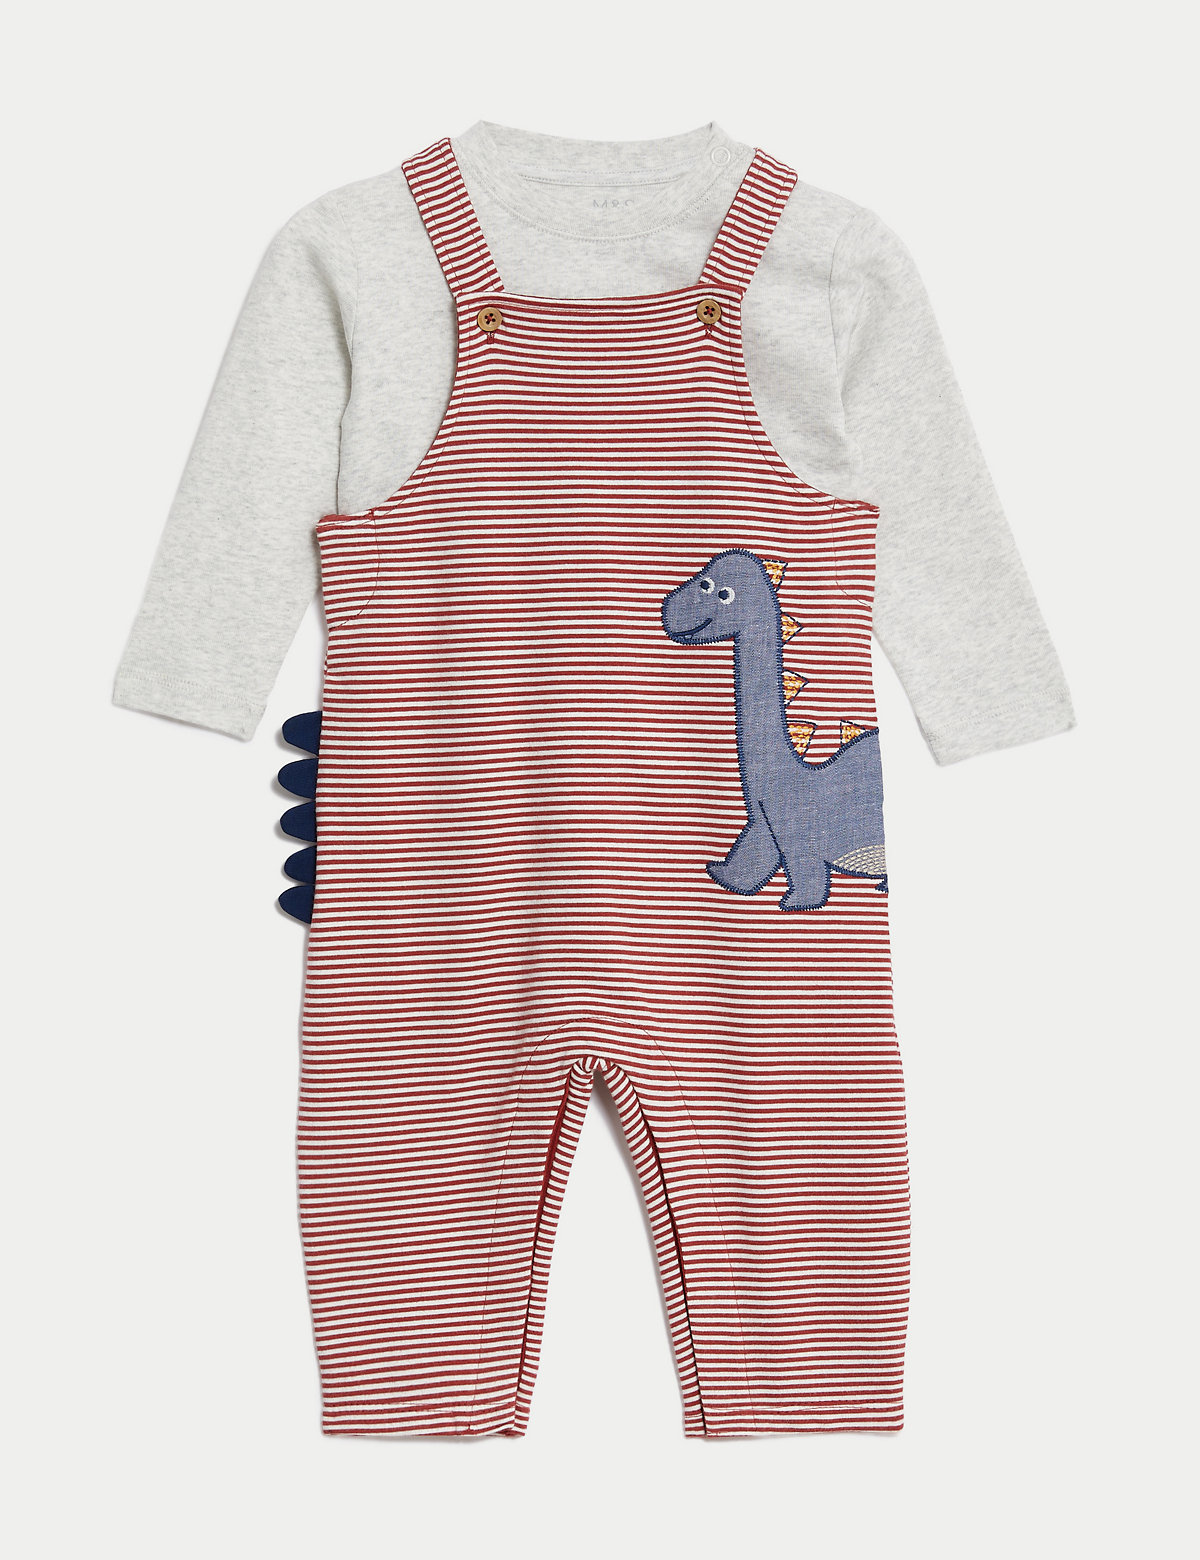 2pc Cotton Rich Striped Dinosaur Outfit (0-3 Yrs)